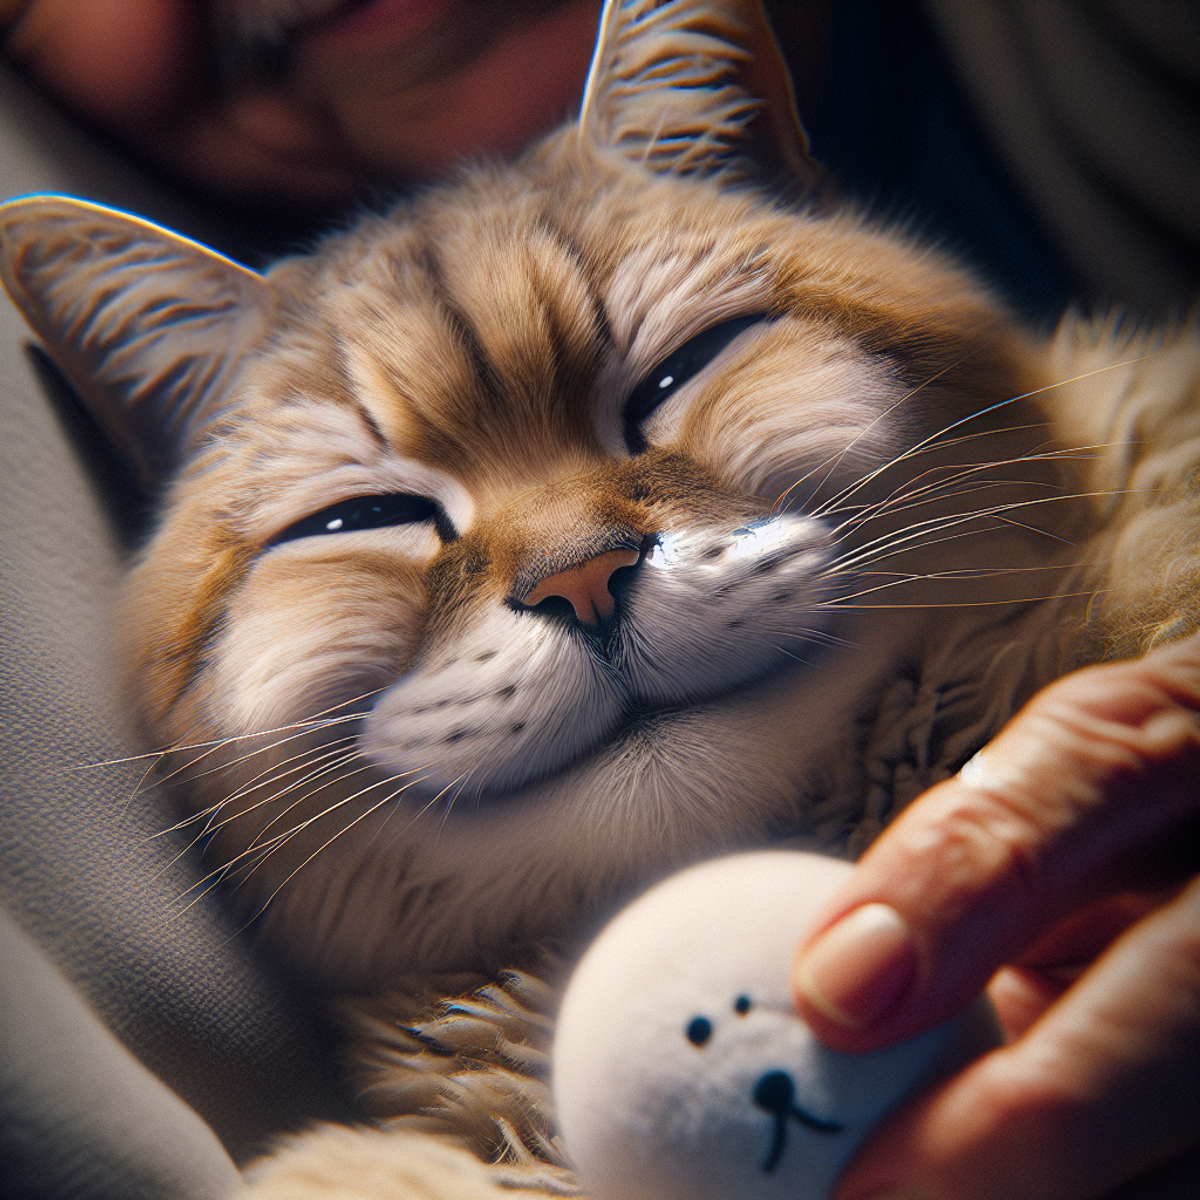 An elderly cat with a serene expression playing with a soft toy.